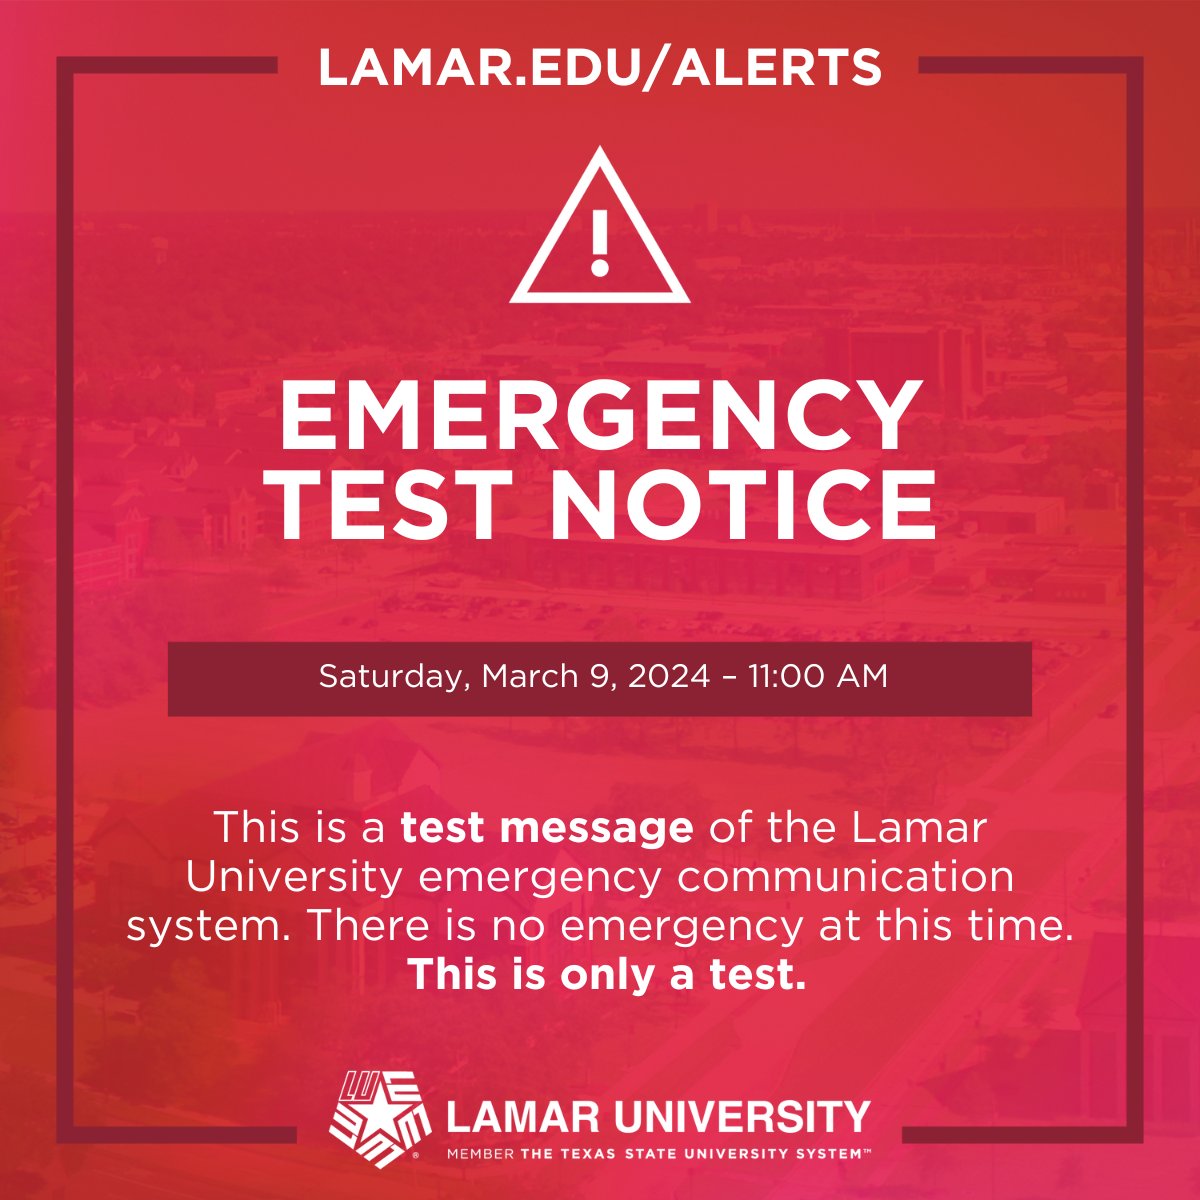 This is a test message of the Lamar University emergency communication system. There is no emergency at this time. This is only a test.